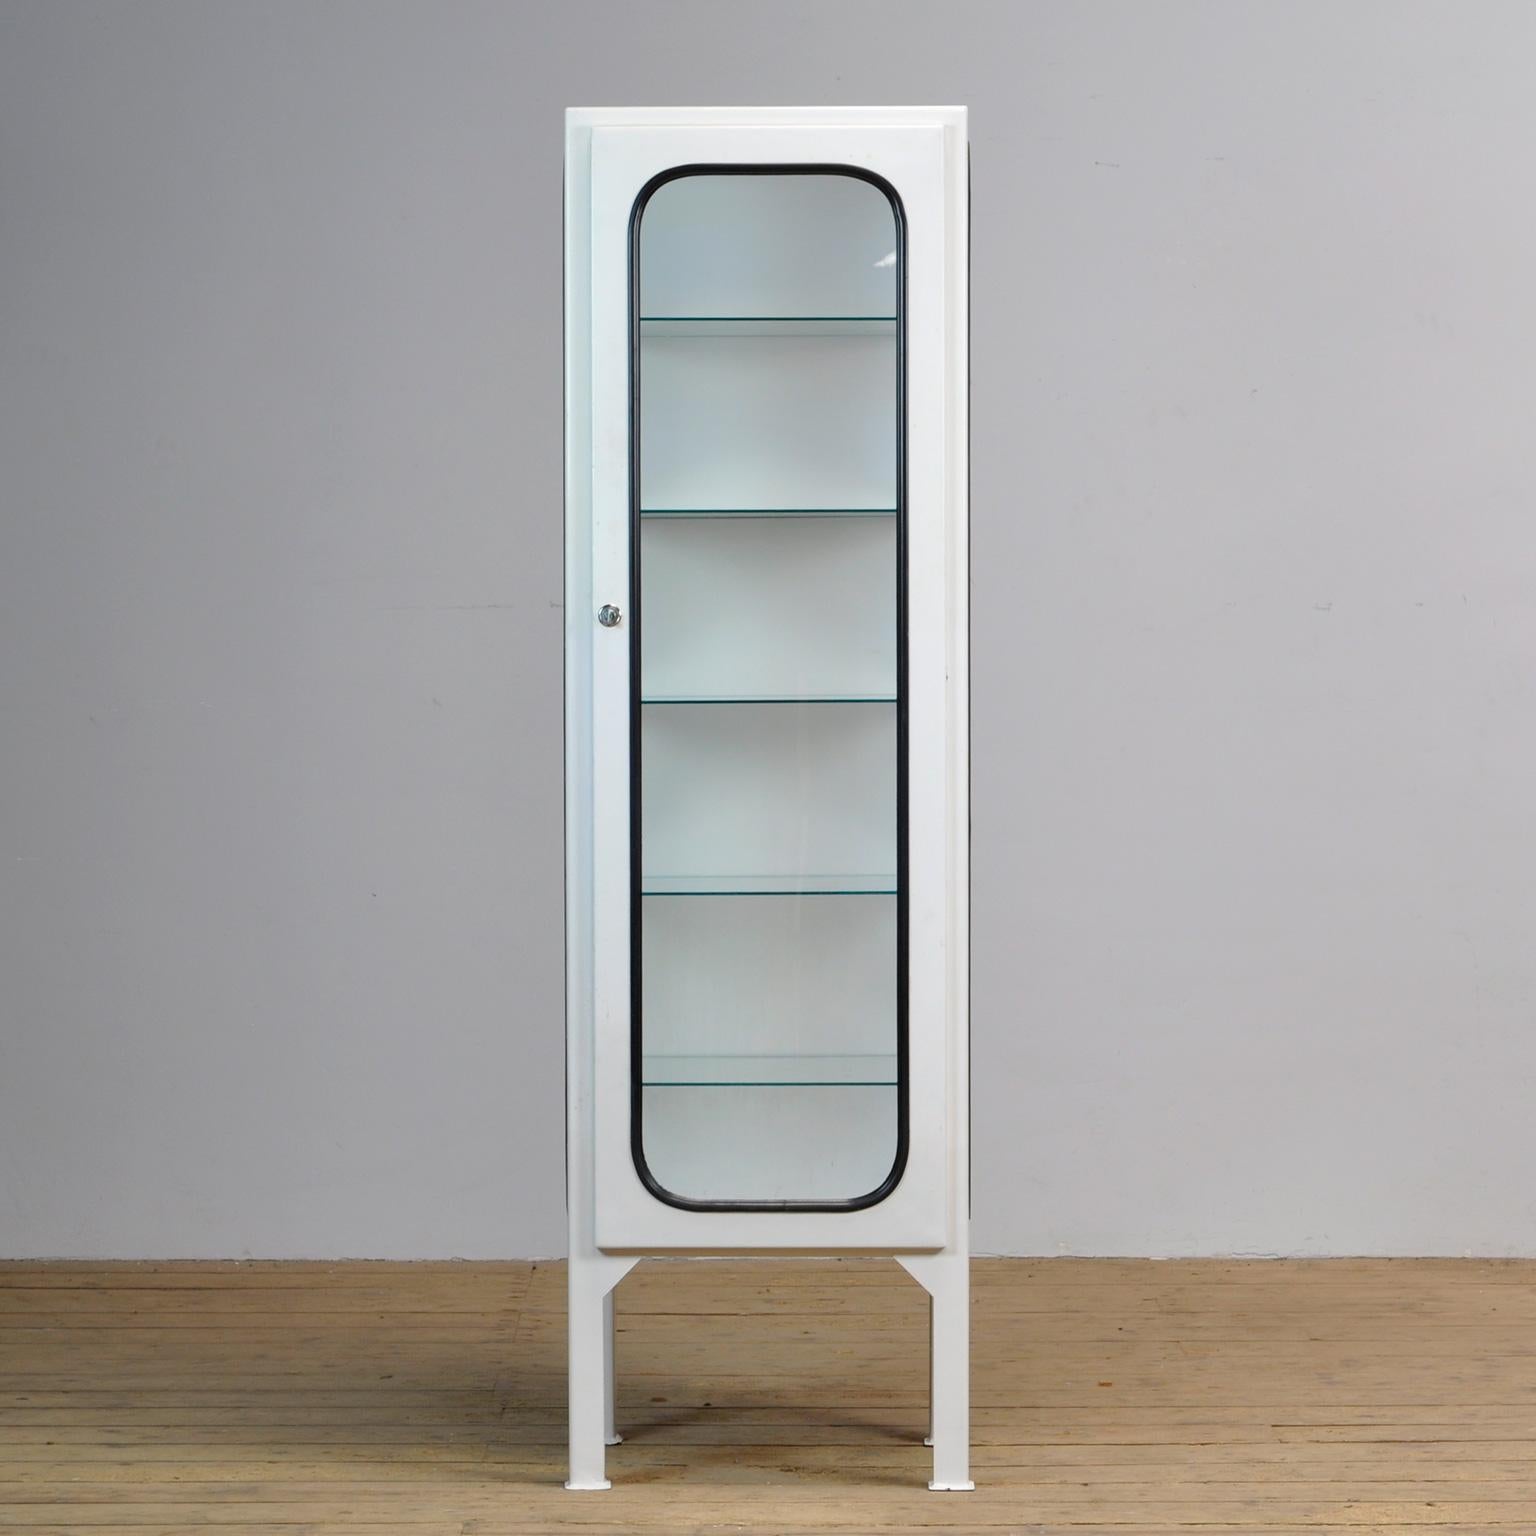 This medicial cabinet was designed in the 1970s and produced in 1975 in hungary. It is made from steel and glass, the glass is held in place by a black rubber strip. The cabinet features five adjustable glass shelves and a functioning lock/key.